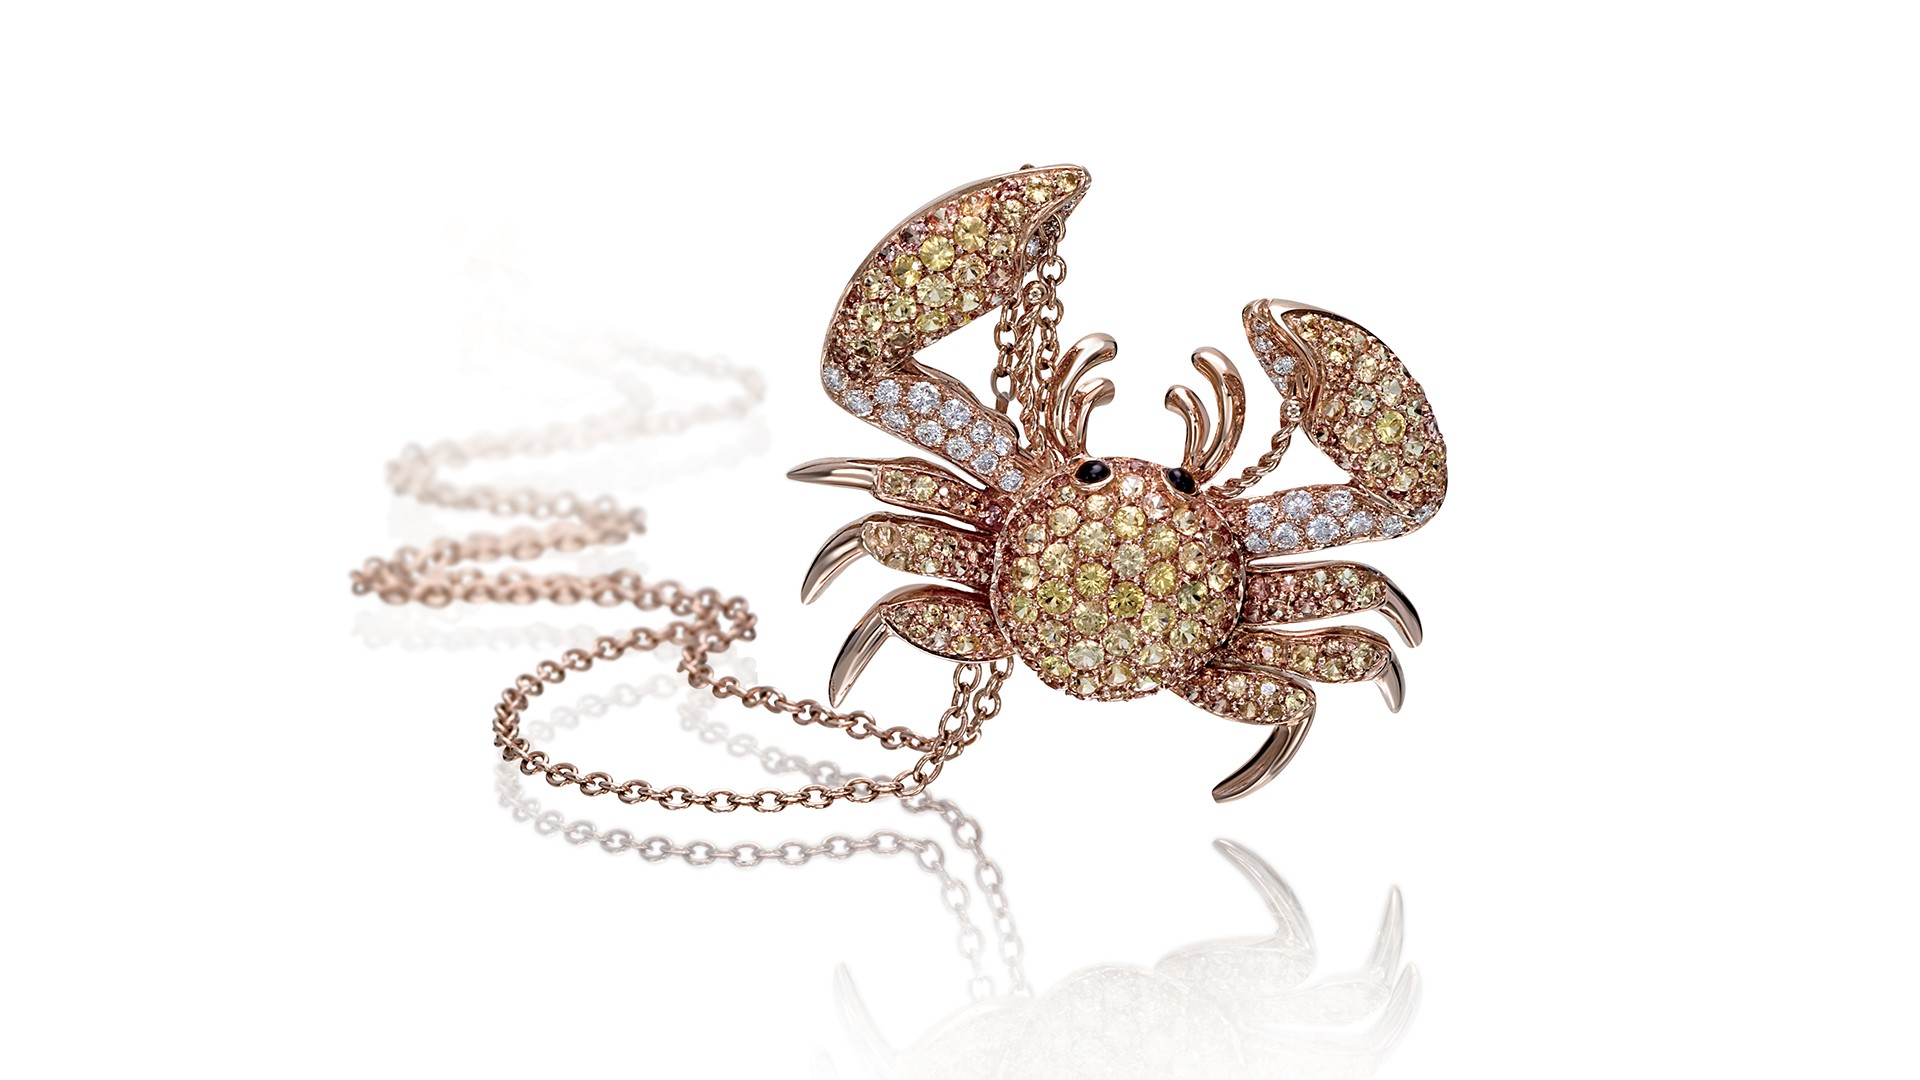 necklace with crab-shaped pendant and precious stones